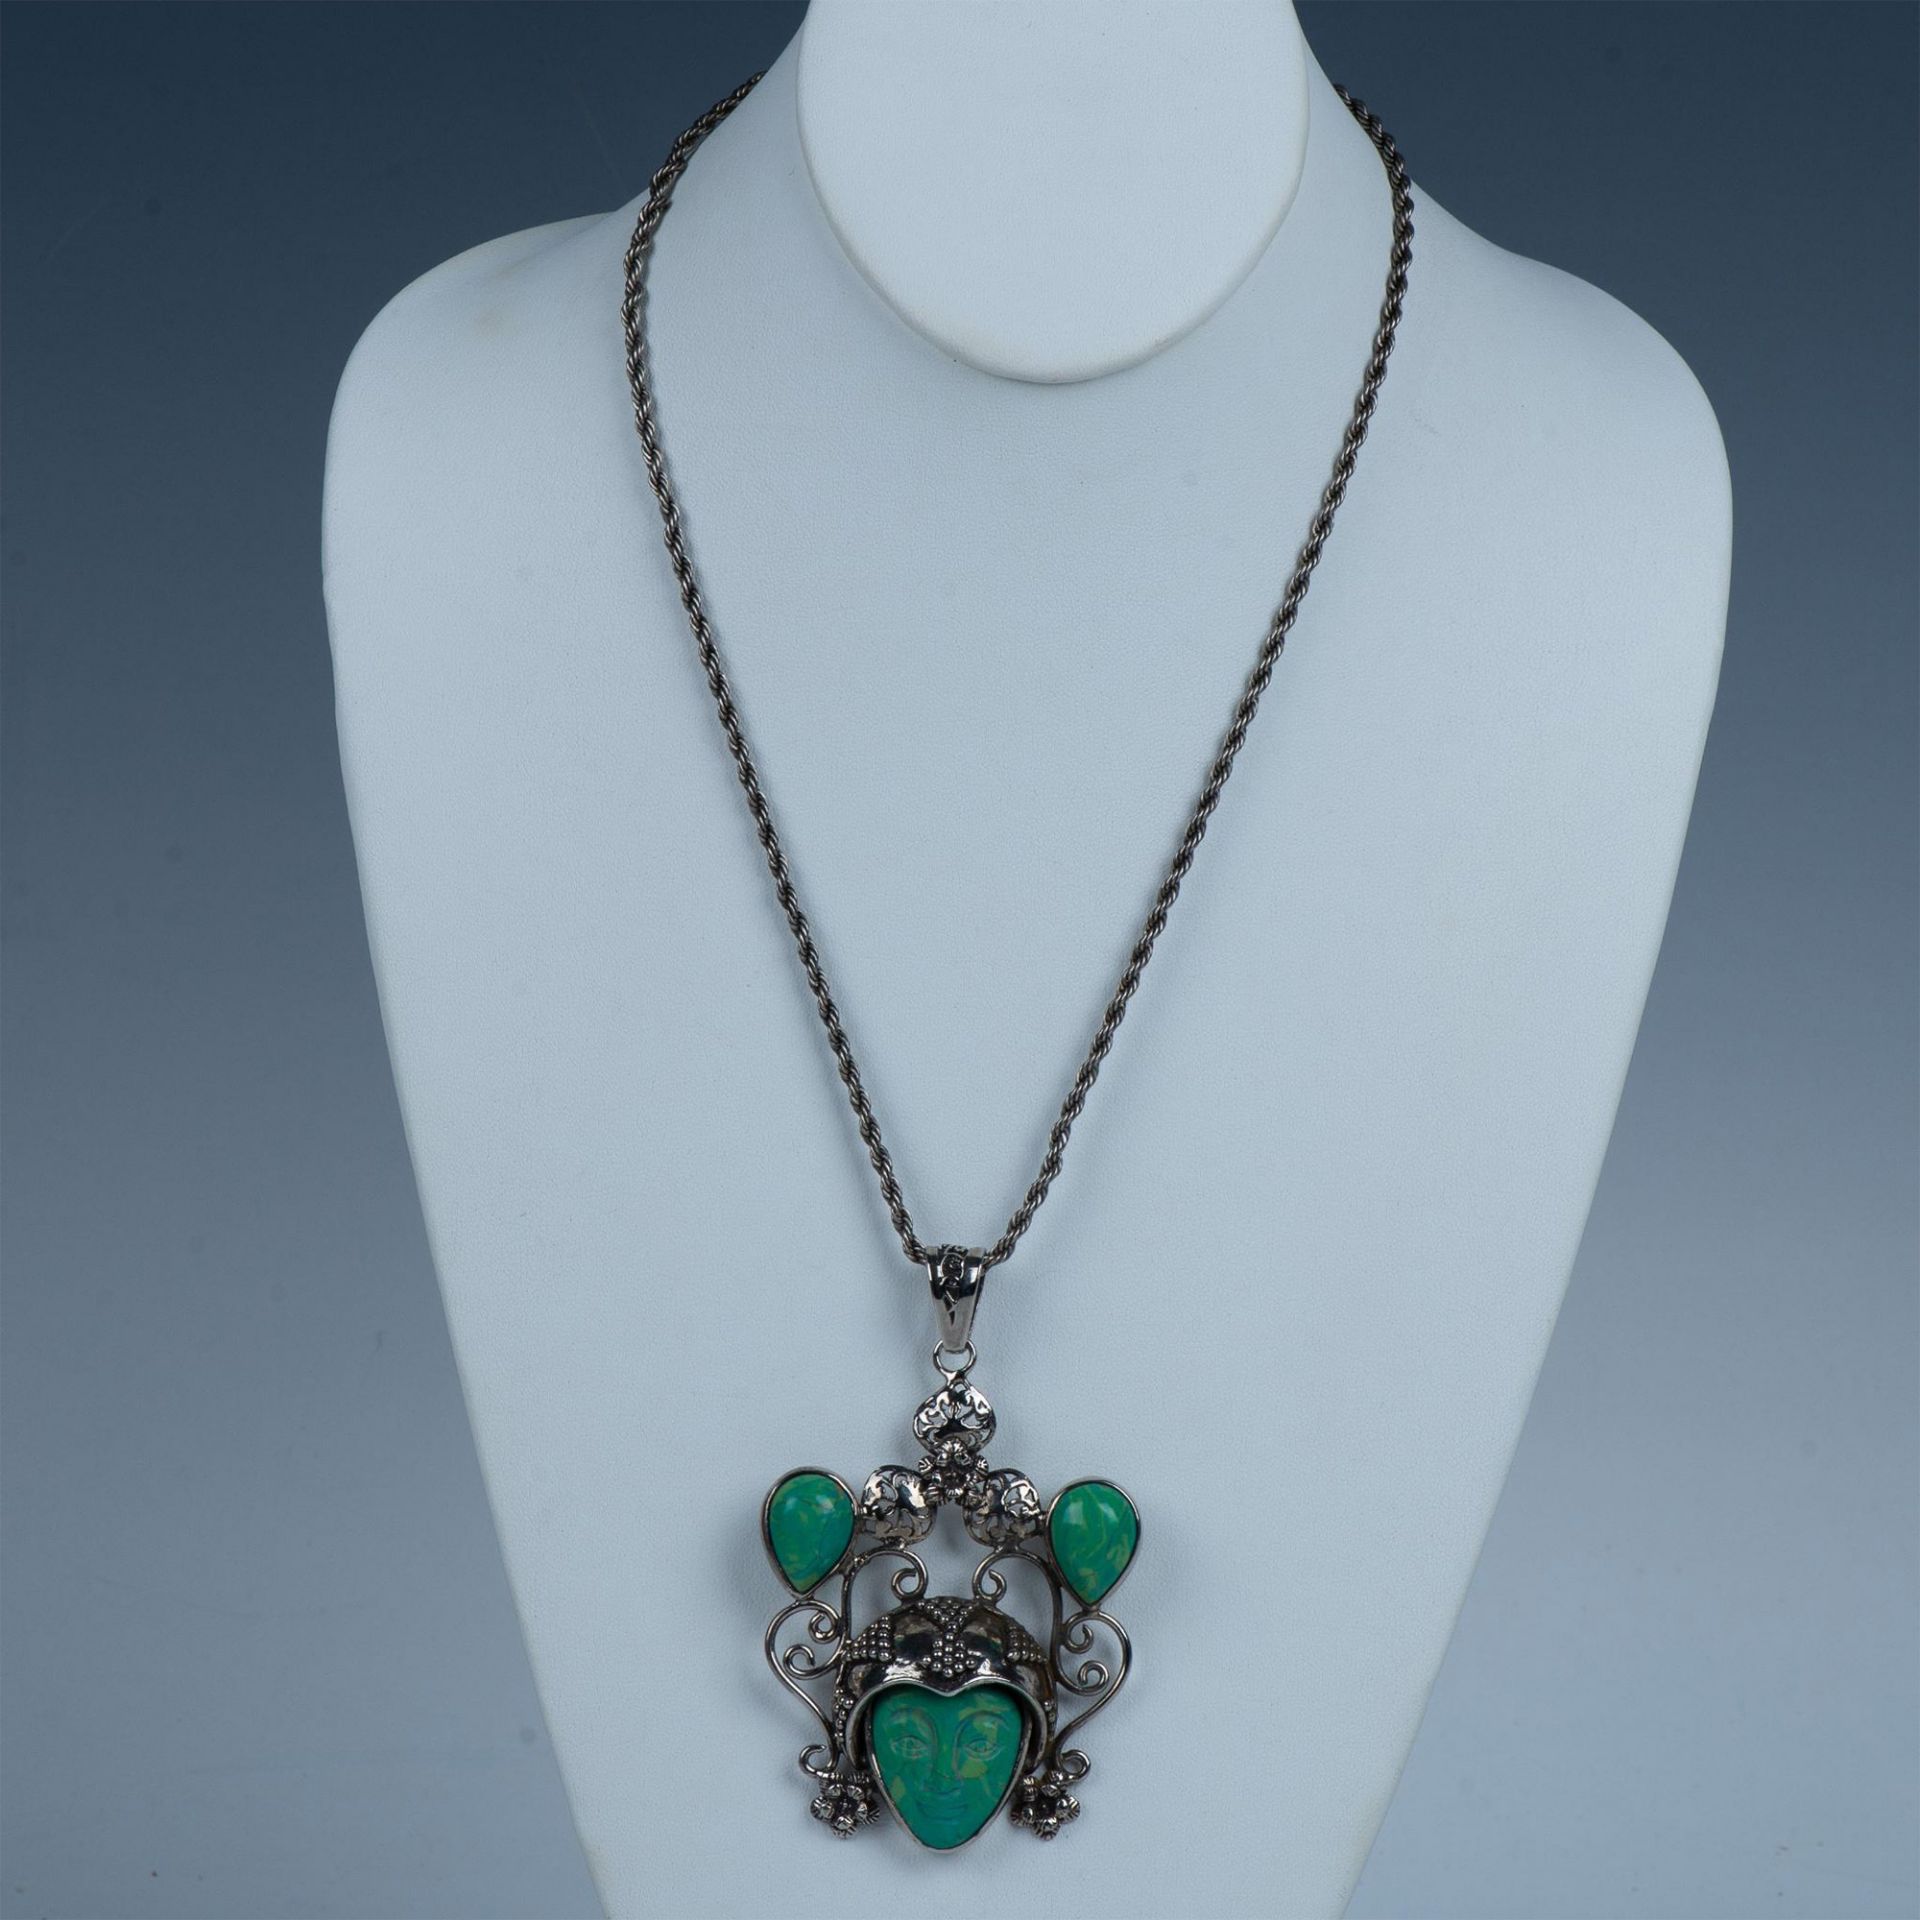 Mid-Century Sterling & Turquoise Bali Moon Goddess Necklace - Image 2 of 3